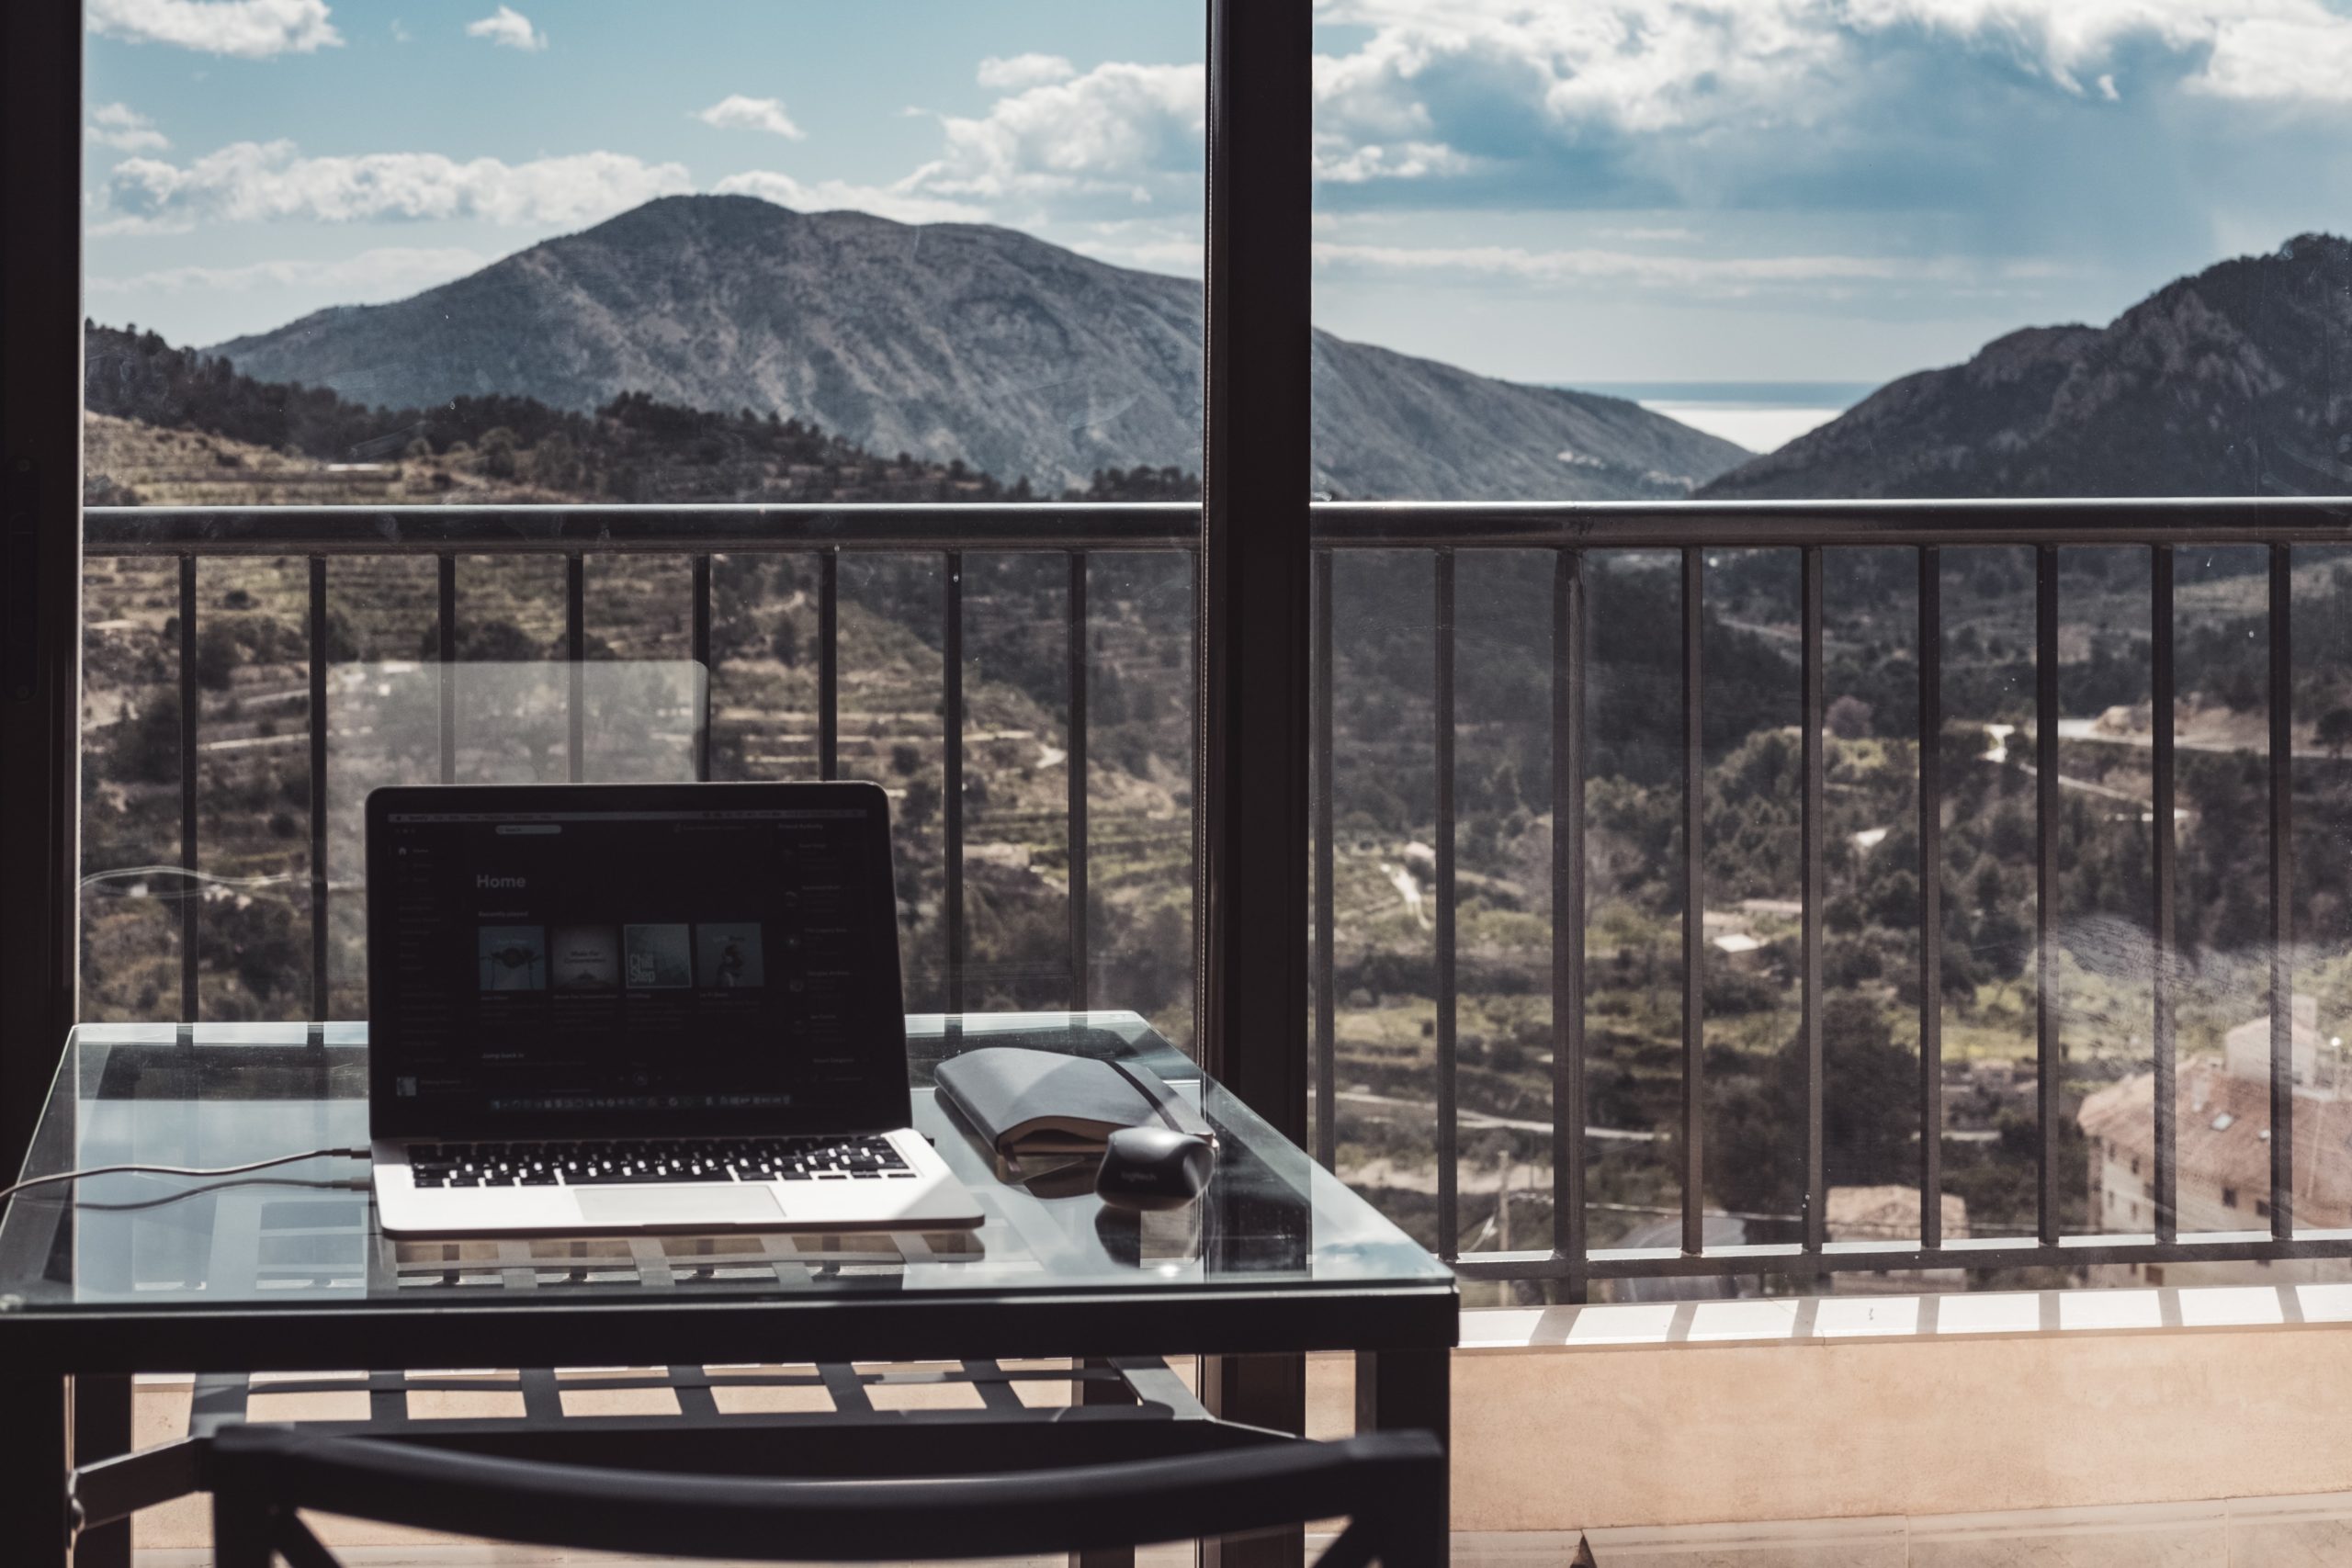 A Macbook rests on a desk, in front a window with a view of mountains and the sea.